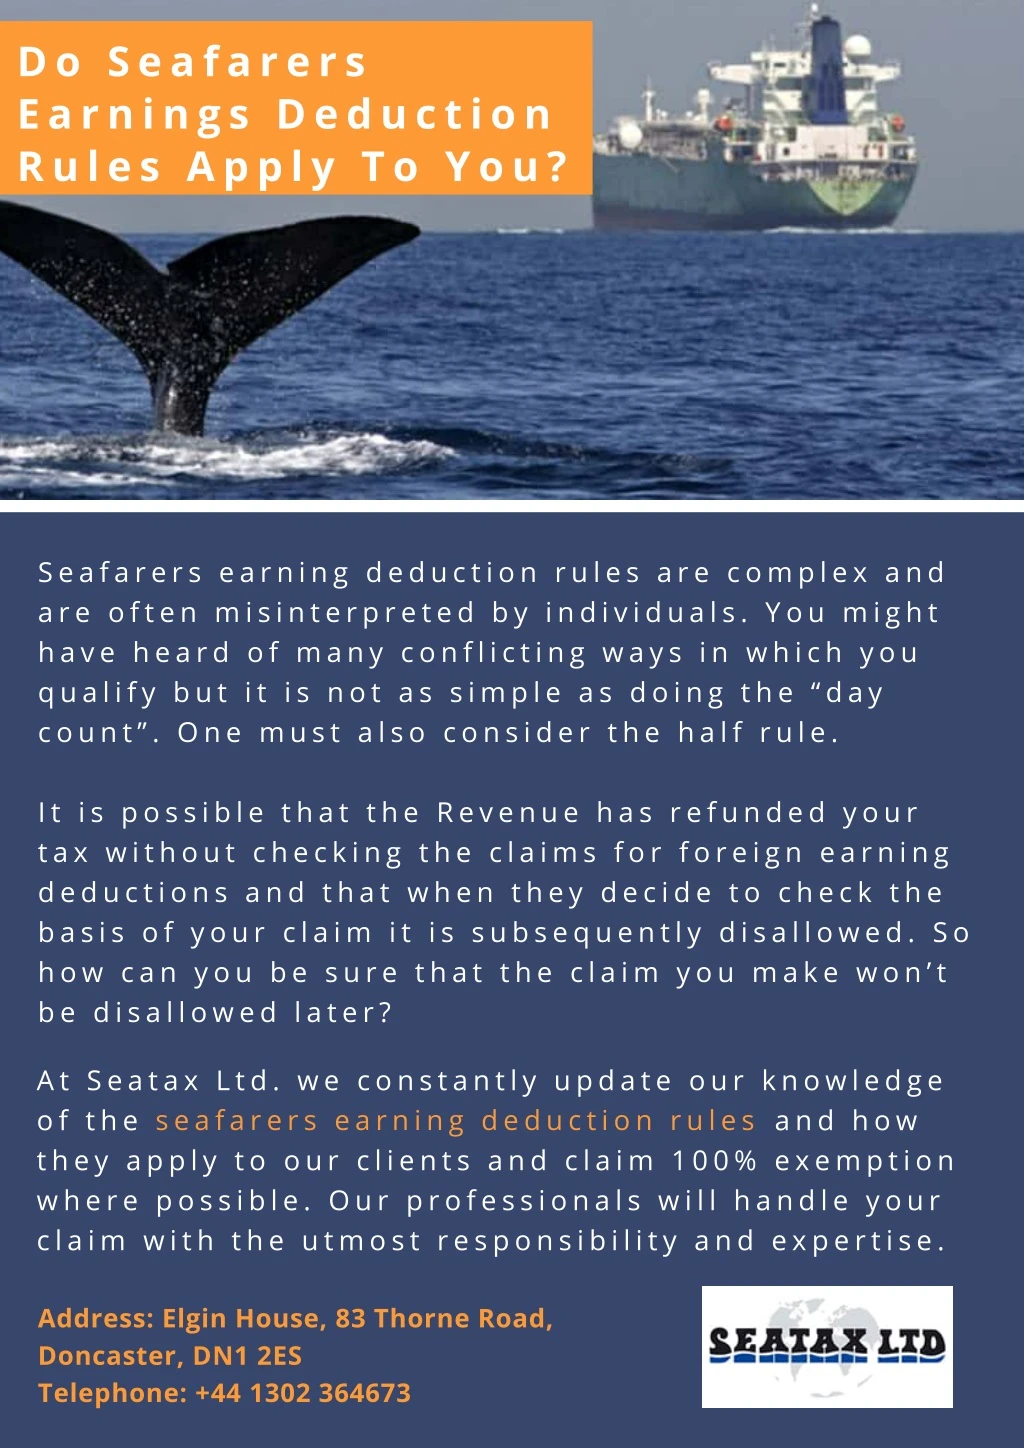 do seafarers earnings deduction rules apply to you